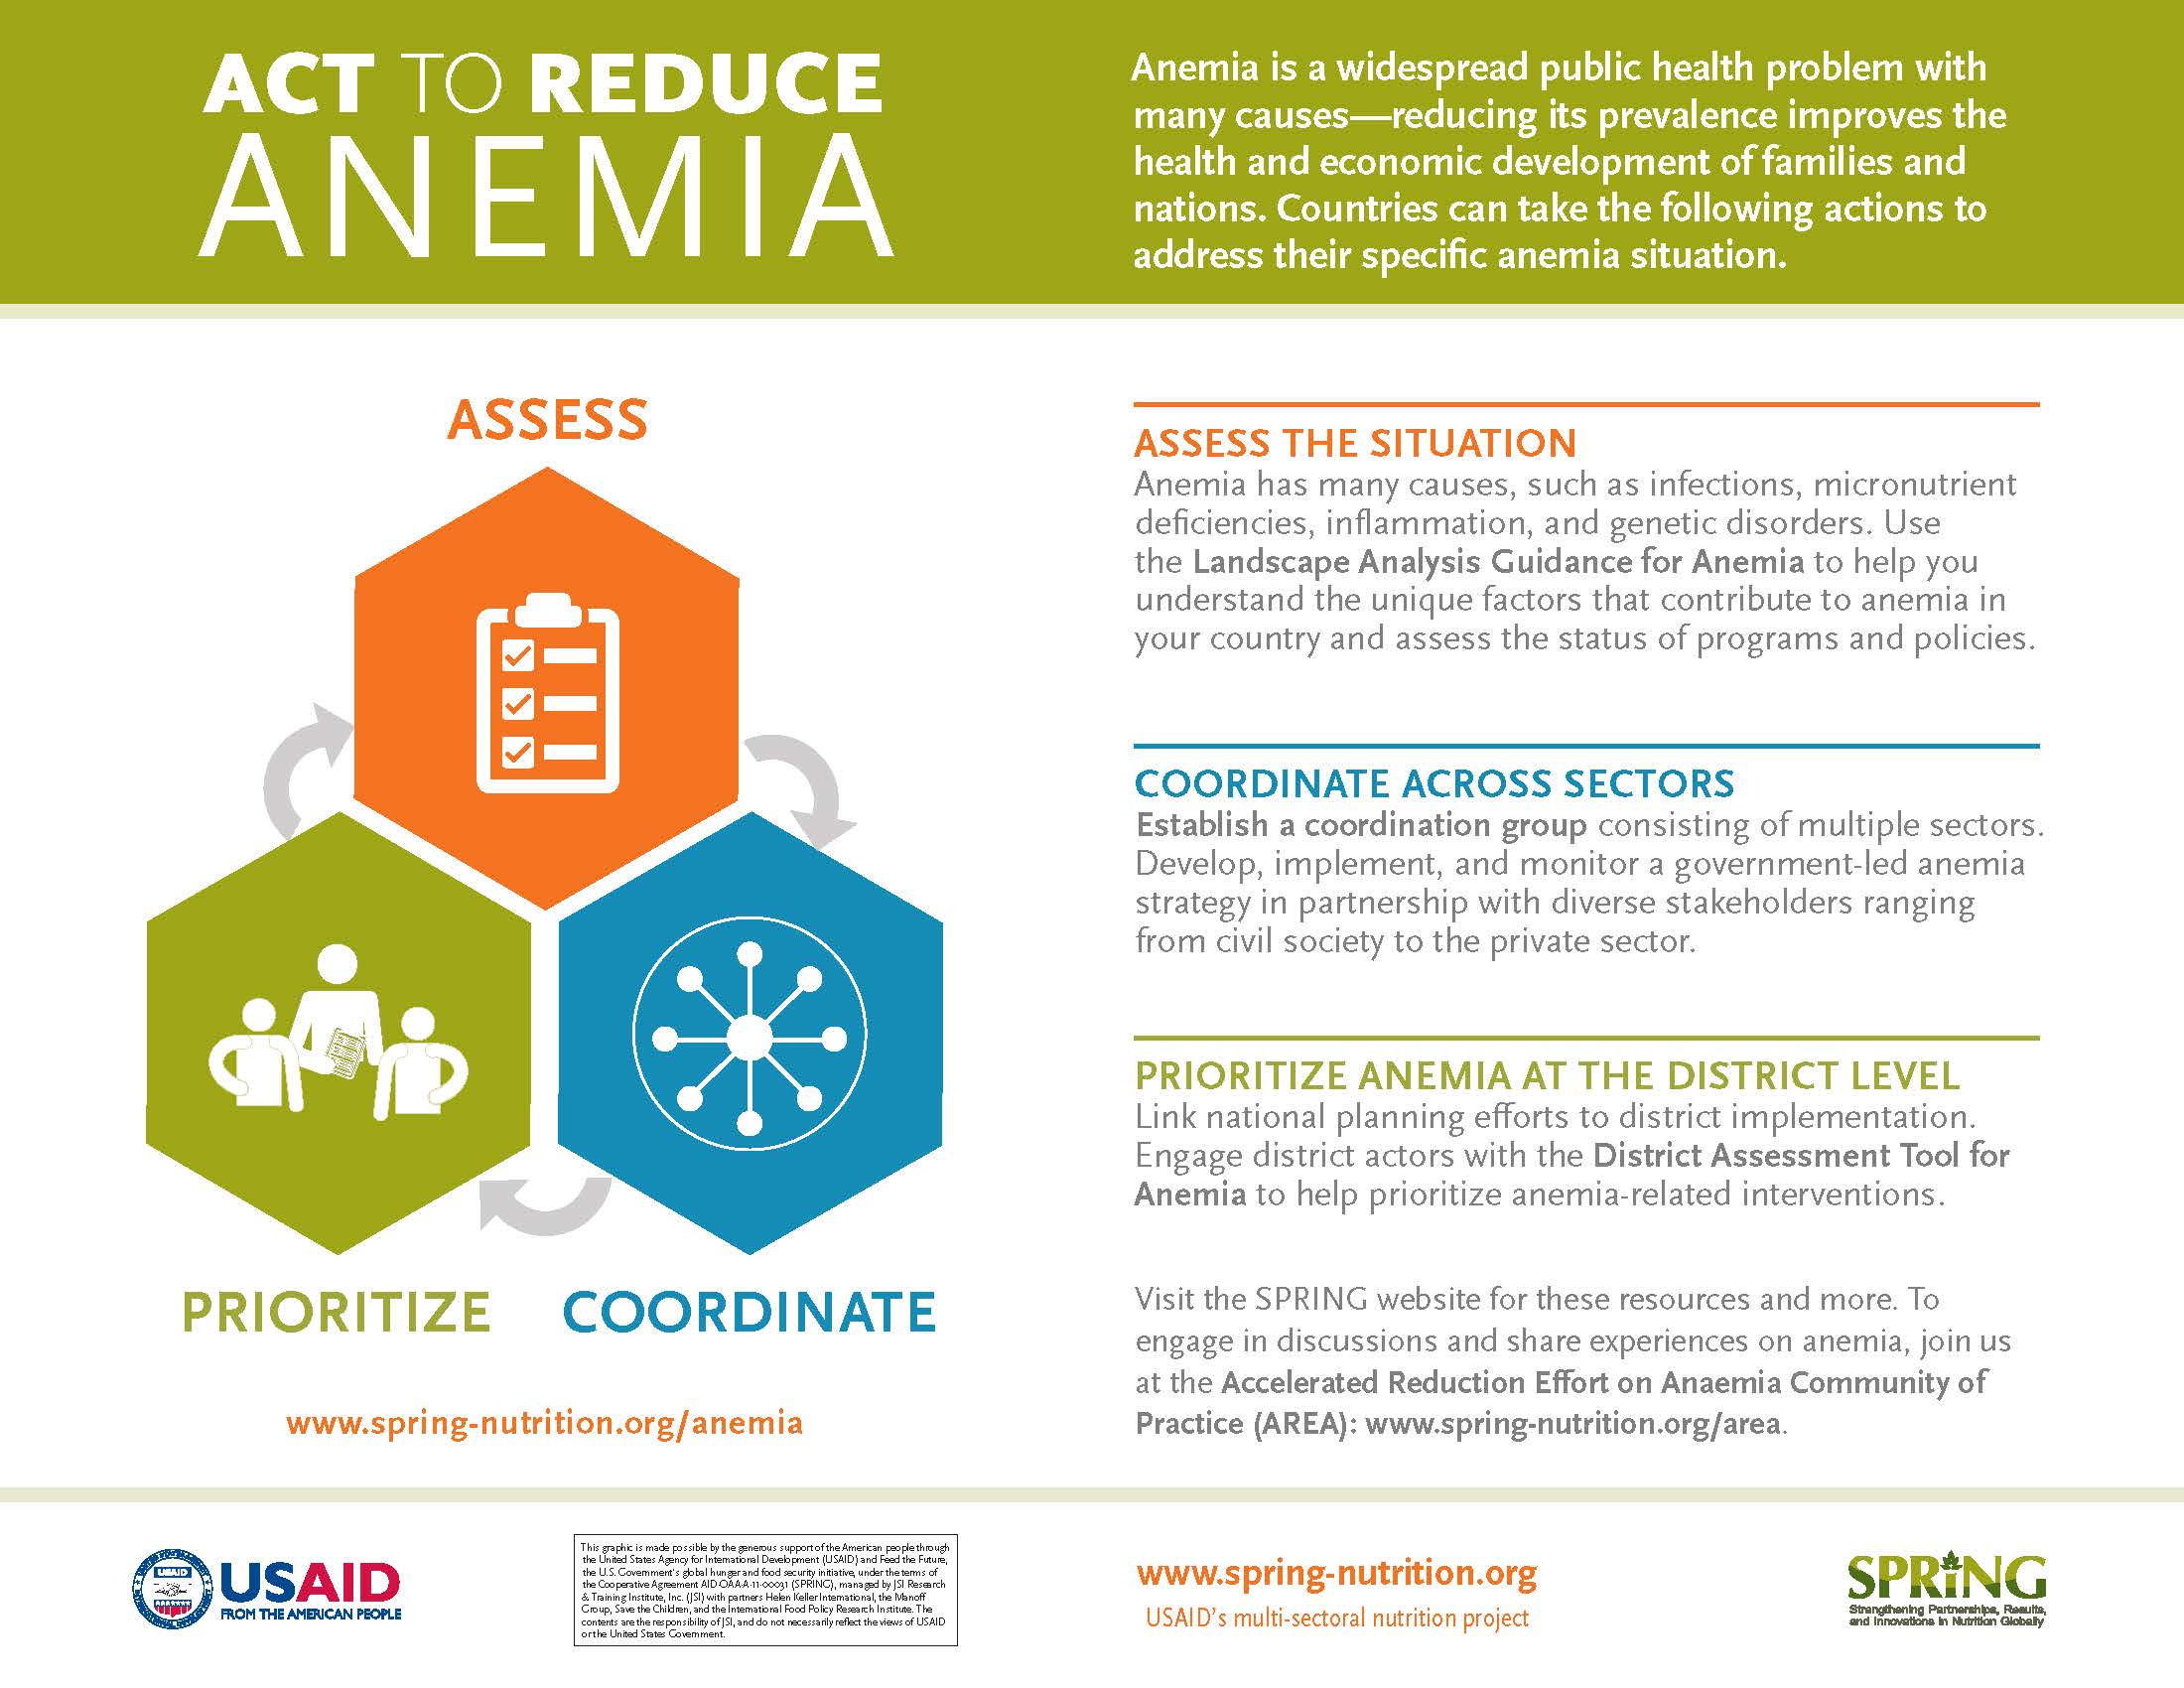 Anemia infographic. Images: graphics representing the 3 stages - assess, prioritize, coordinate. Title: Act to Reduce Anemia, Summary: Anemia is a widespread public health problem with many causes—reducing its prevalence improves the health and economic development of families and nations. Countries can take the following actions to address their specific anemia situation. Text: ASSESS THE SITUATION Anemia has many causes, such as infections, micronutrient deficiencies, inflammation, and genetic disorders. 